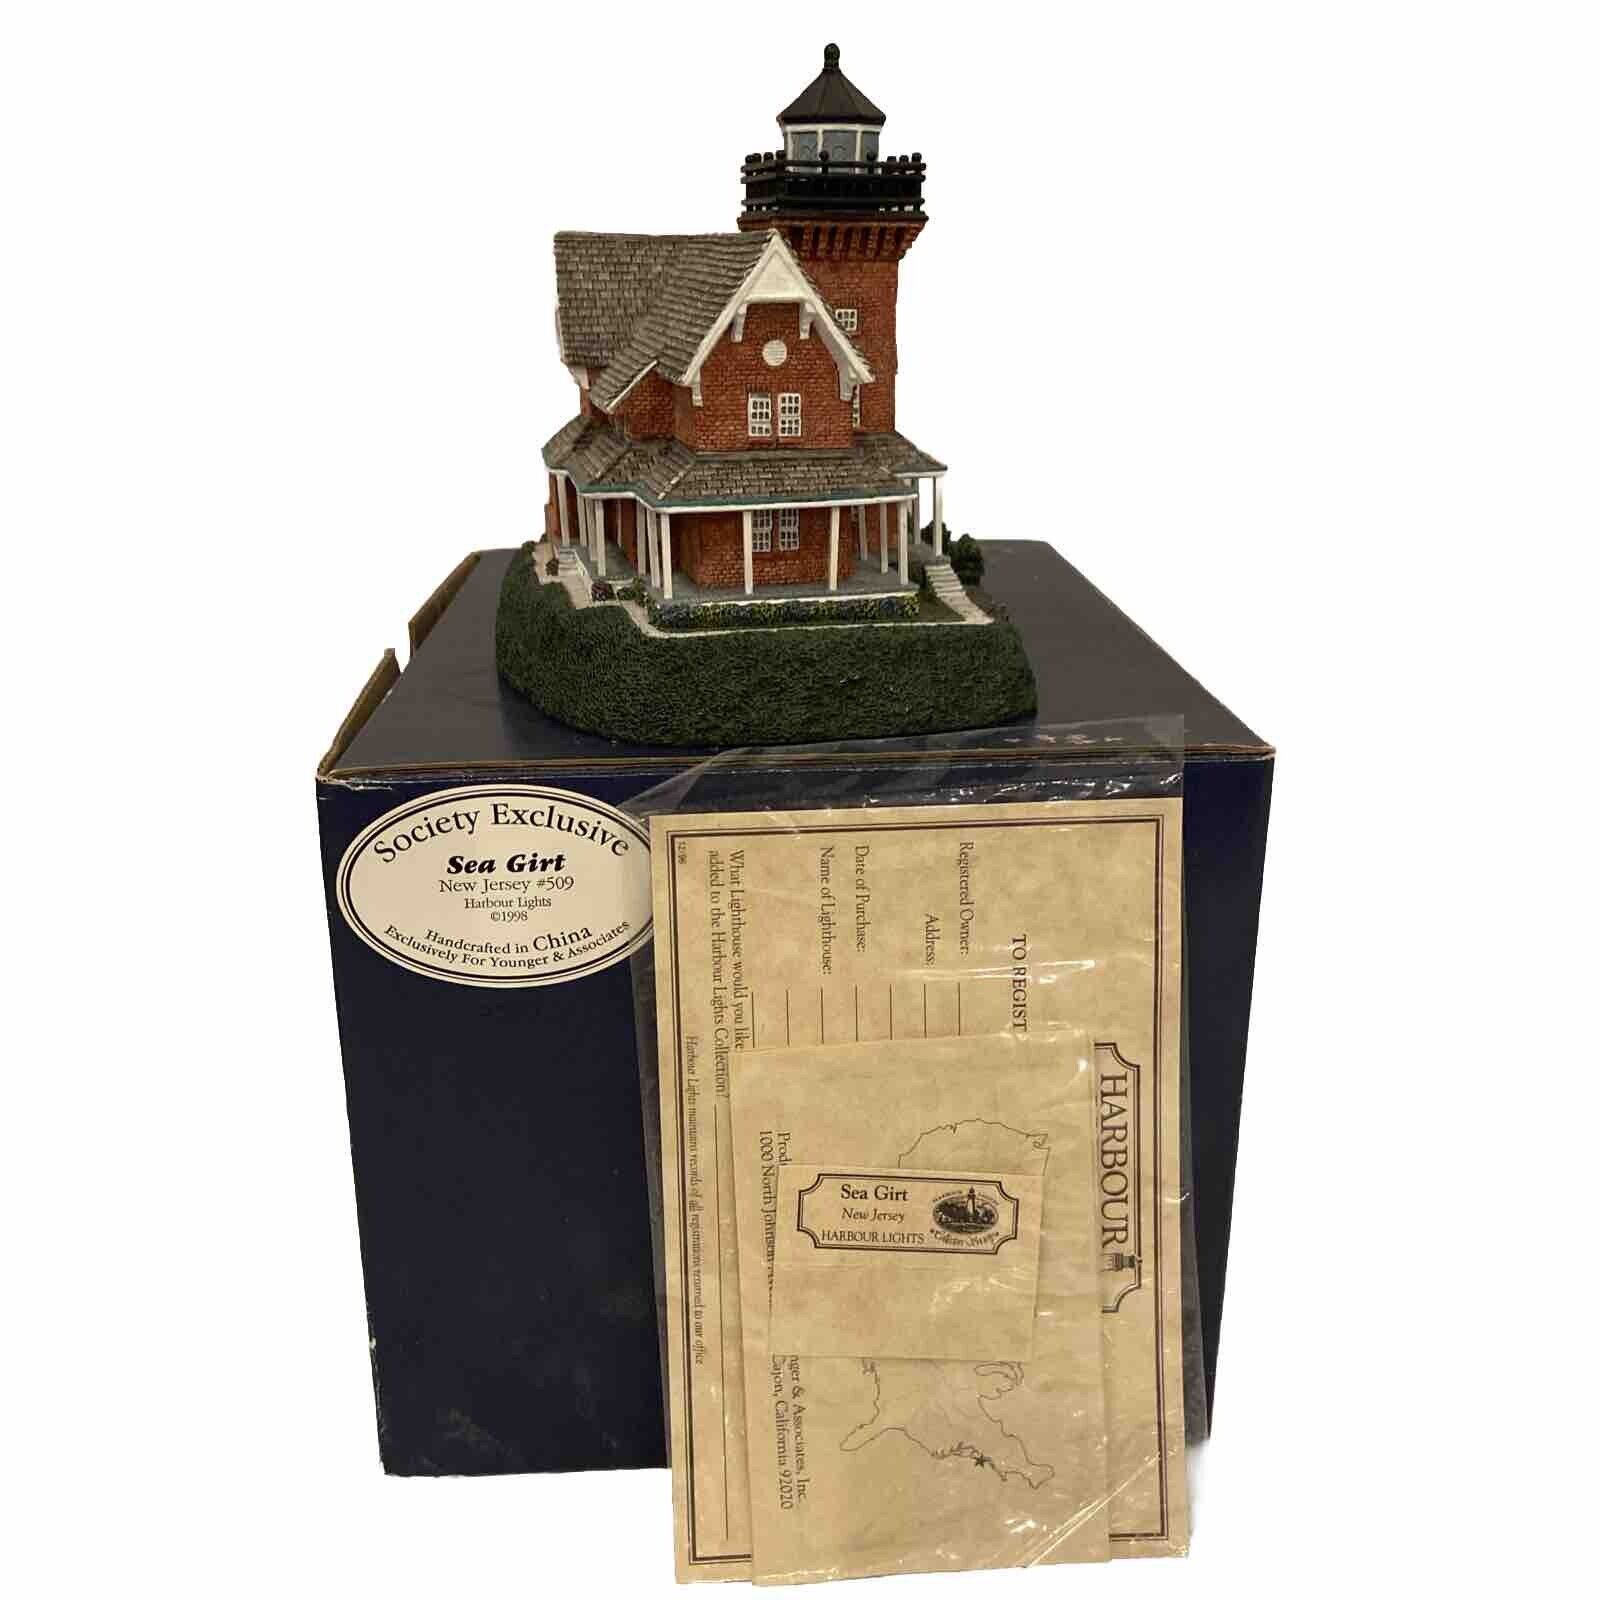 VTG 1998 Harbour Lights Lighthouse Society Exclusive Sea Girt New Jersey #509